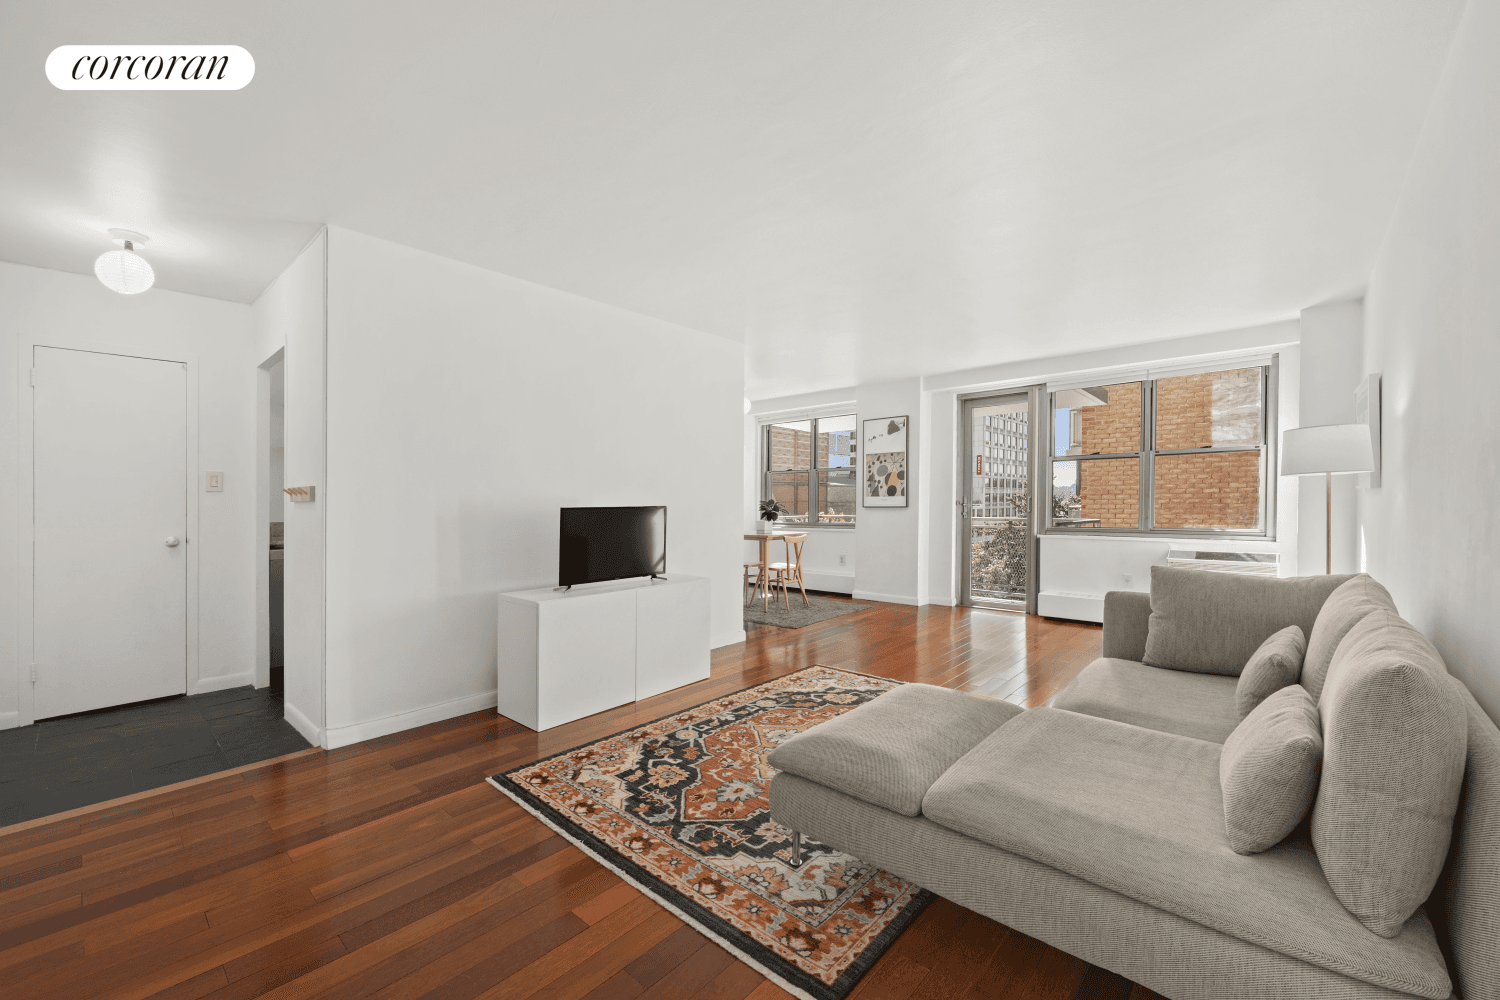 Welcome to 303 West 66th Street, Apartment 6DE, a spacious one bedroom, one bathroom residence in the iconic Lincoln Guild coop, located in the heart of New York City's Upper ...